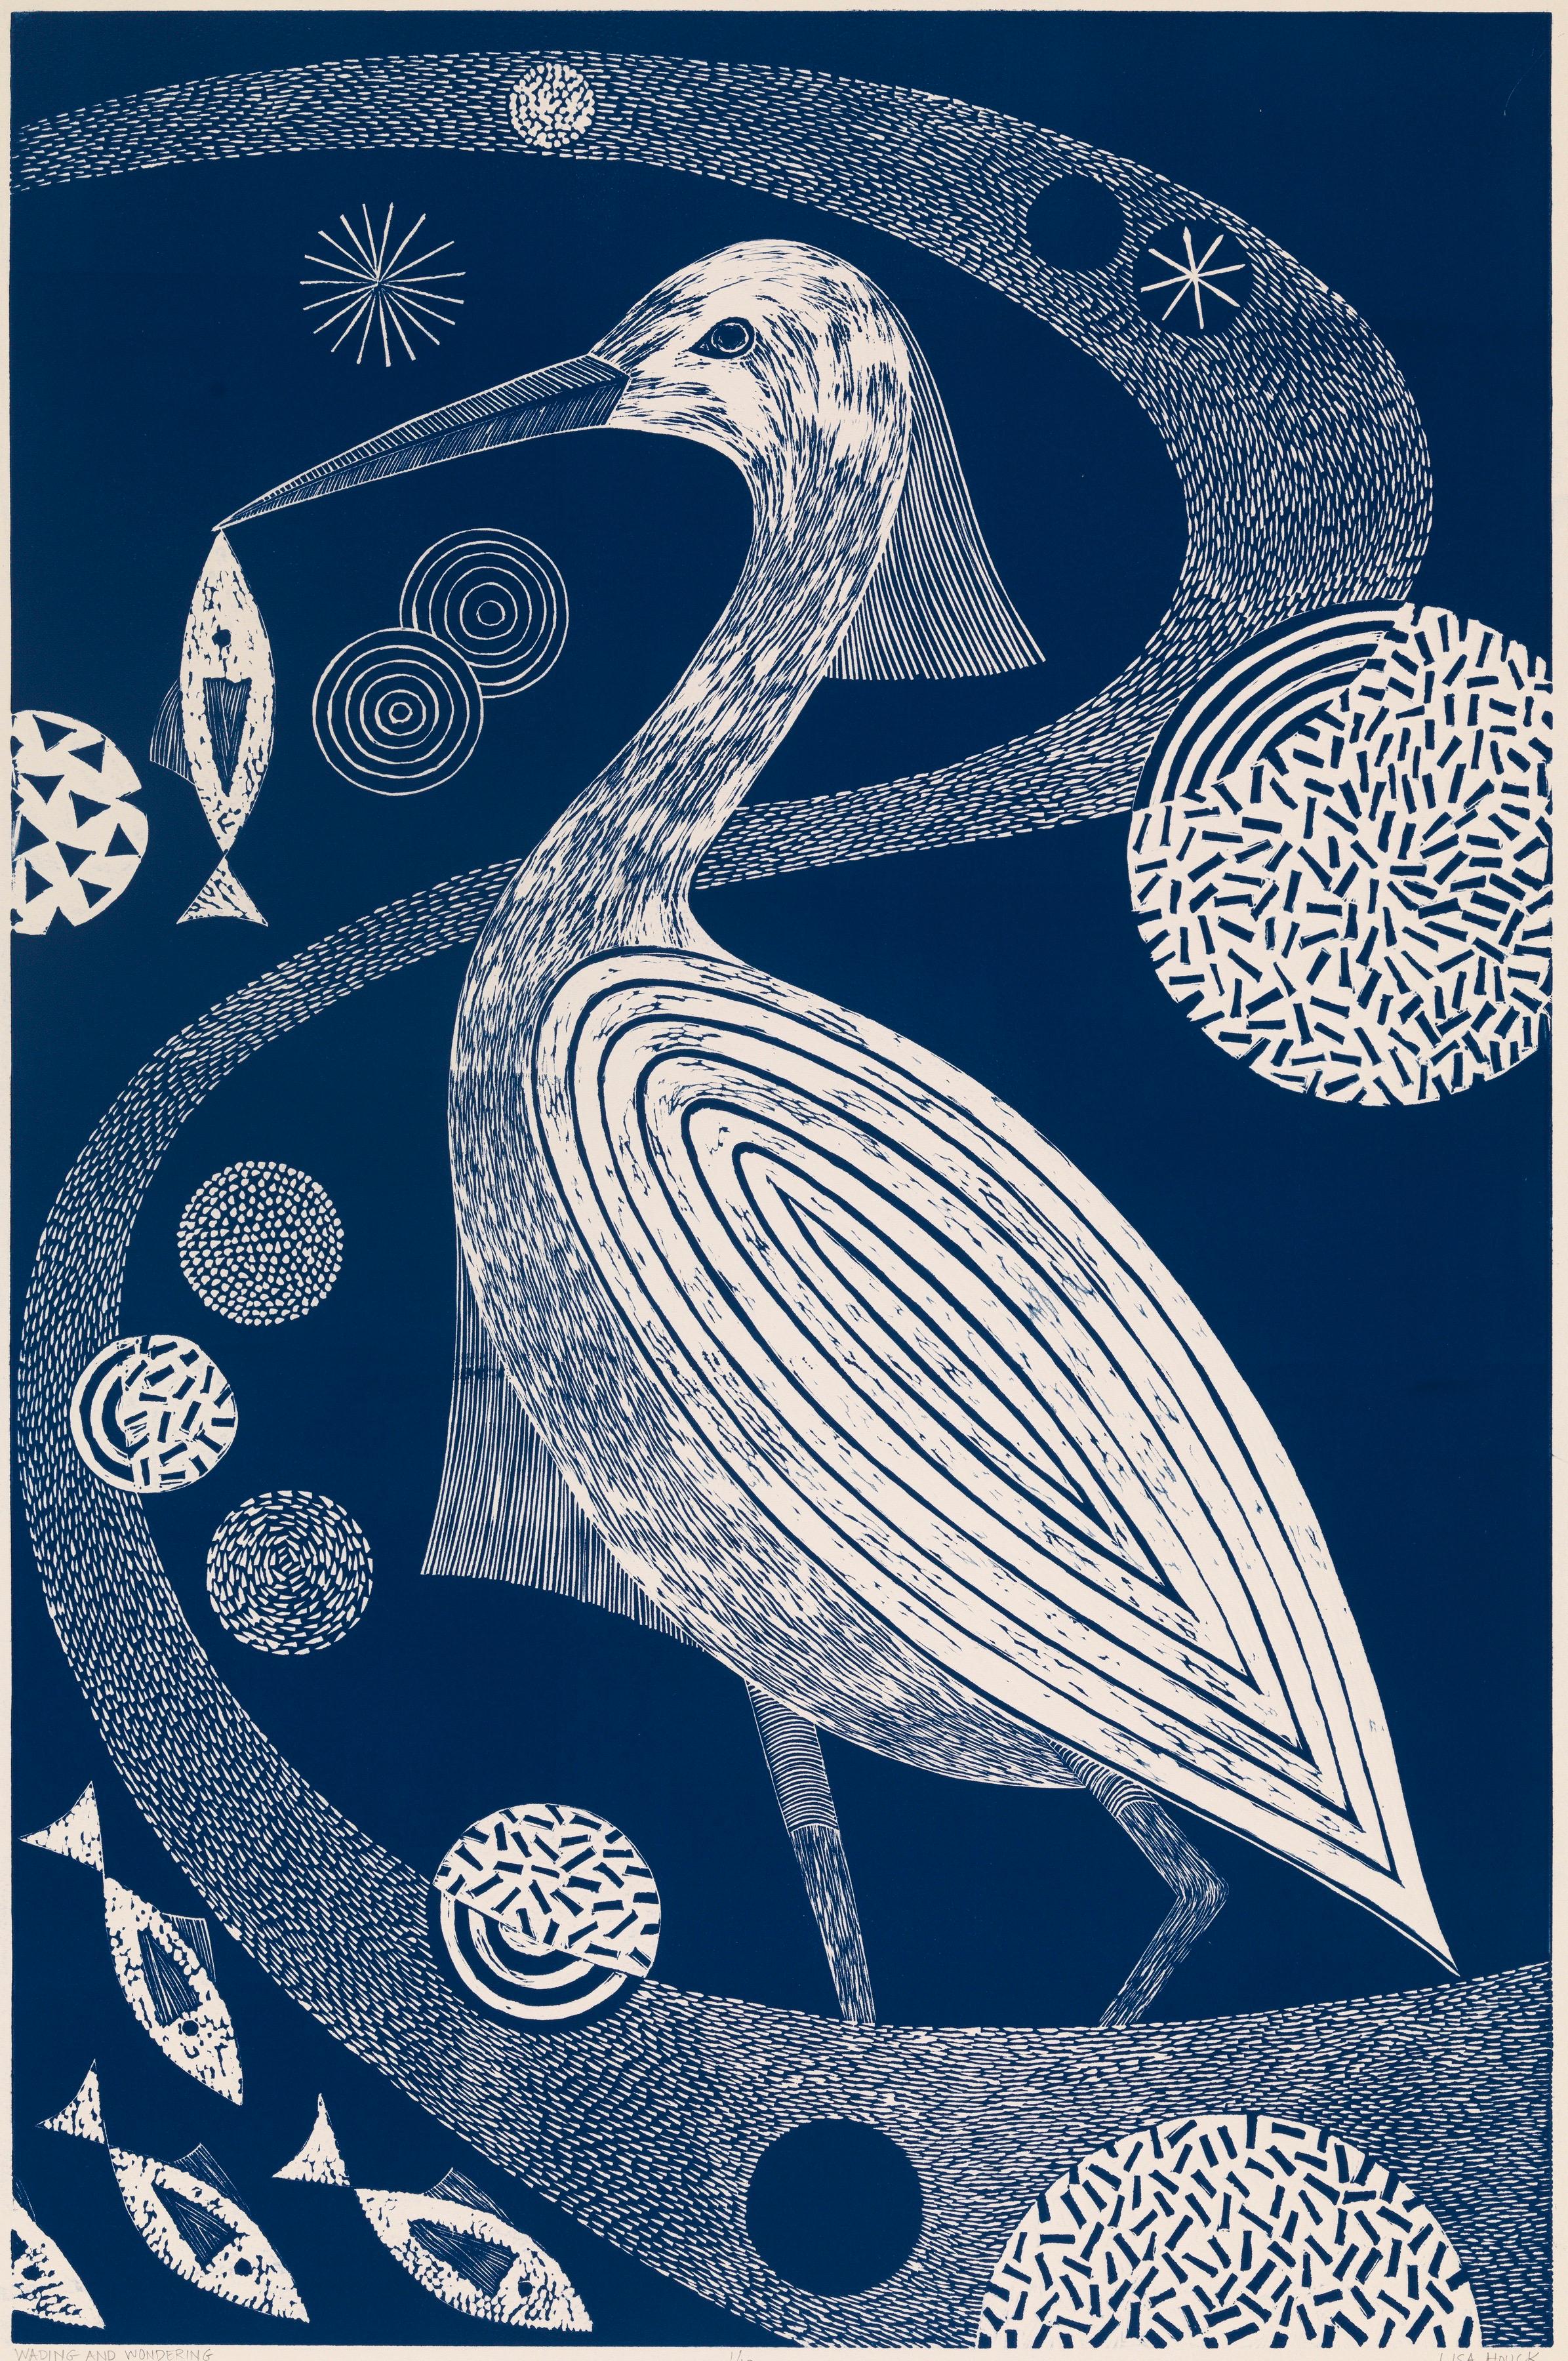 'Stopping and Staring,'  Linoleum Block Print, Edition 10,  35 1/4 x 23 1/4 Inches, is one of a series of 8 related prints in this size in varying shades of blue.   Sold individually or as sets of 2, 3, 4, 5, 6, 7 or 8. 

There is also a separate